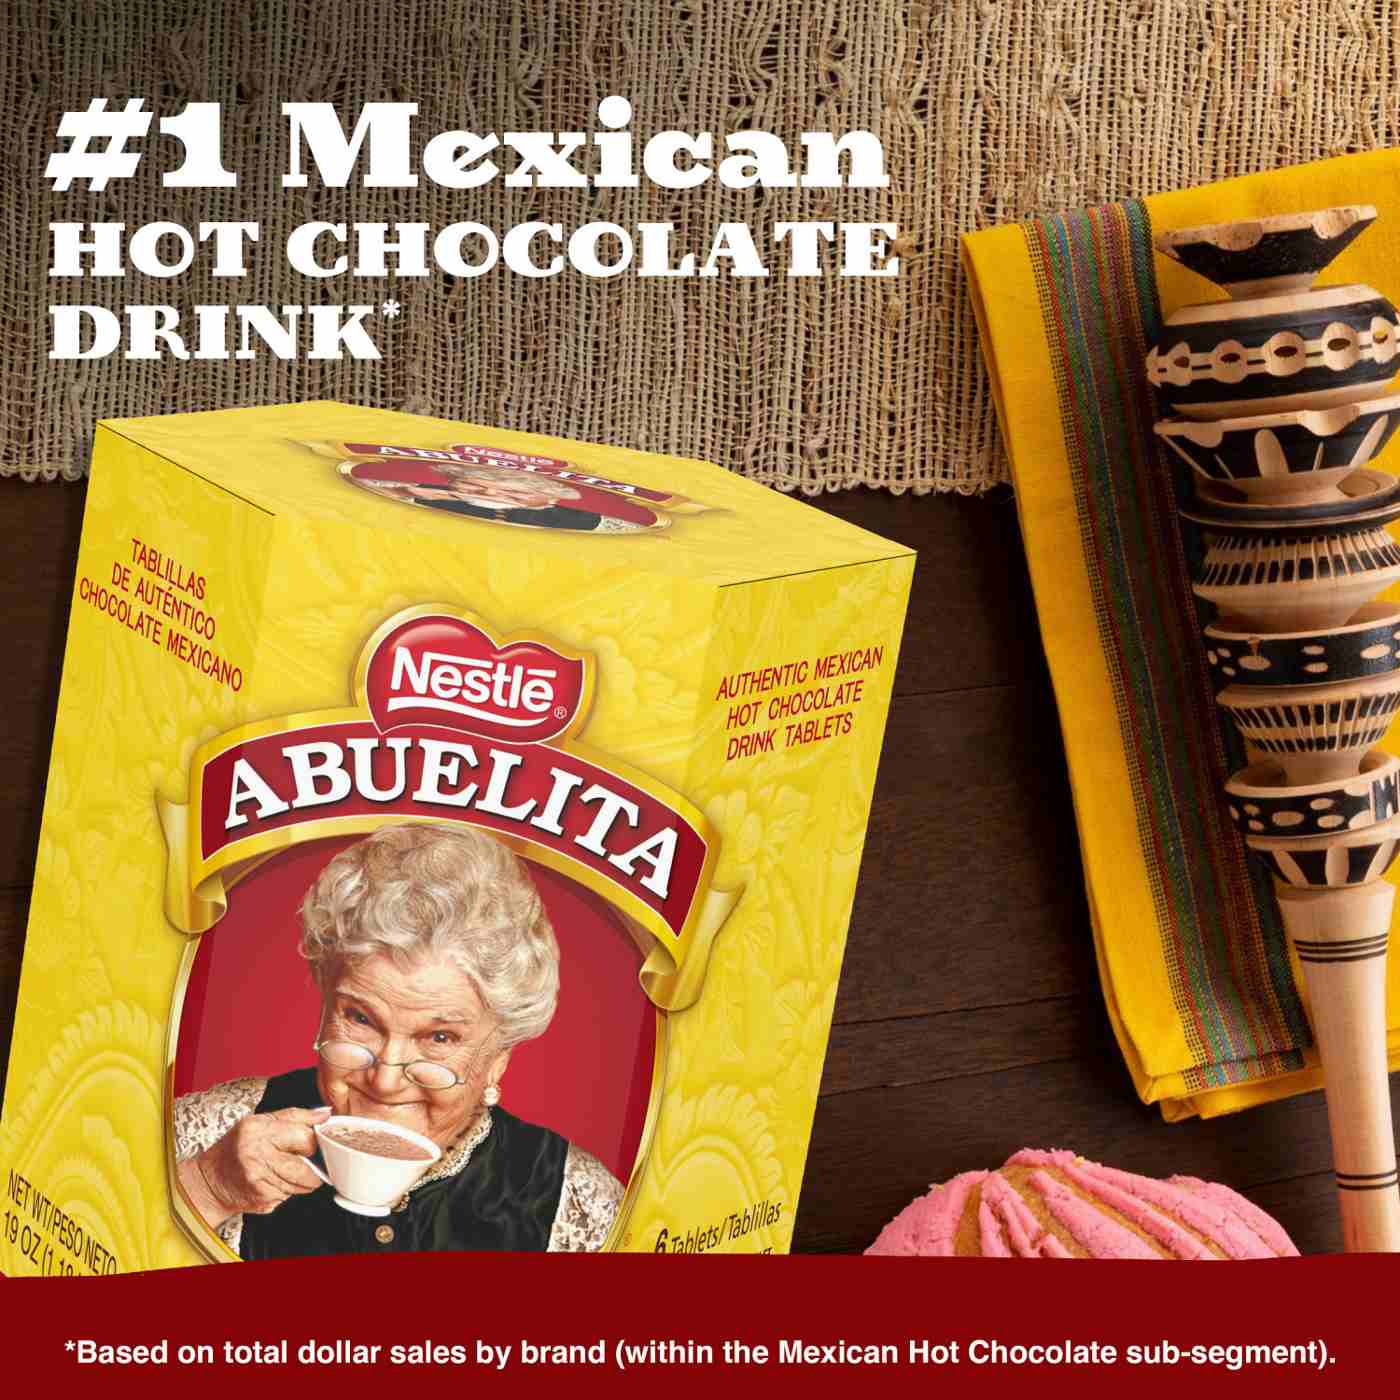 Nestle Abuelita Authentic Mexican Hot Chocolate Drink Tablets; image 5 of 8